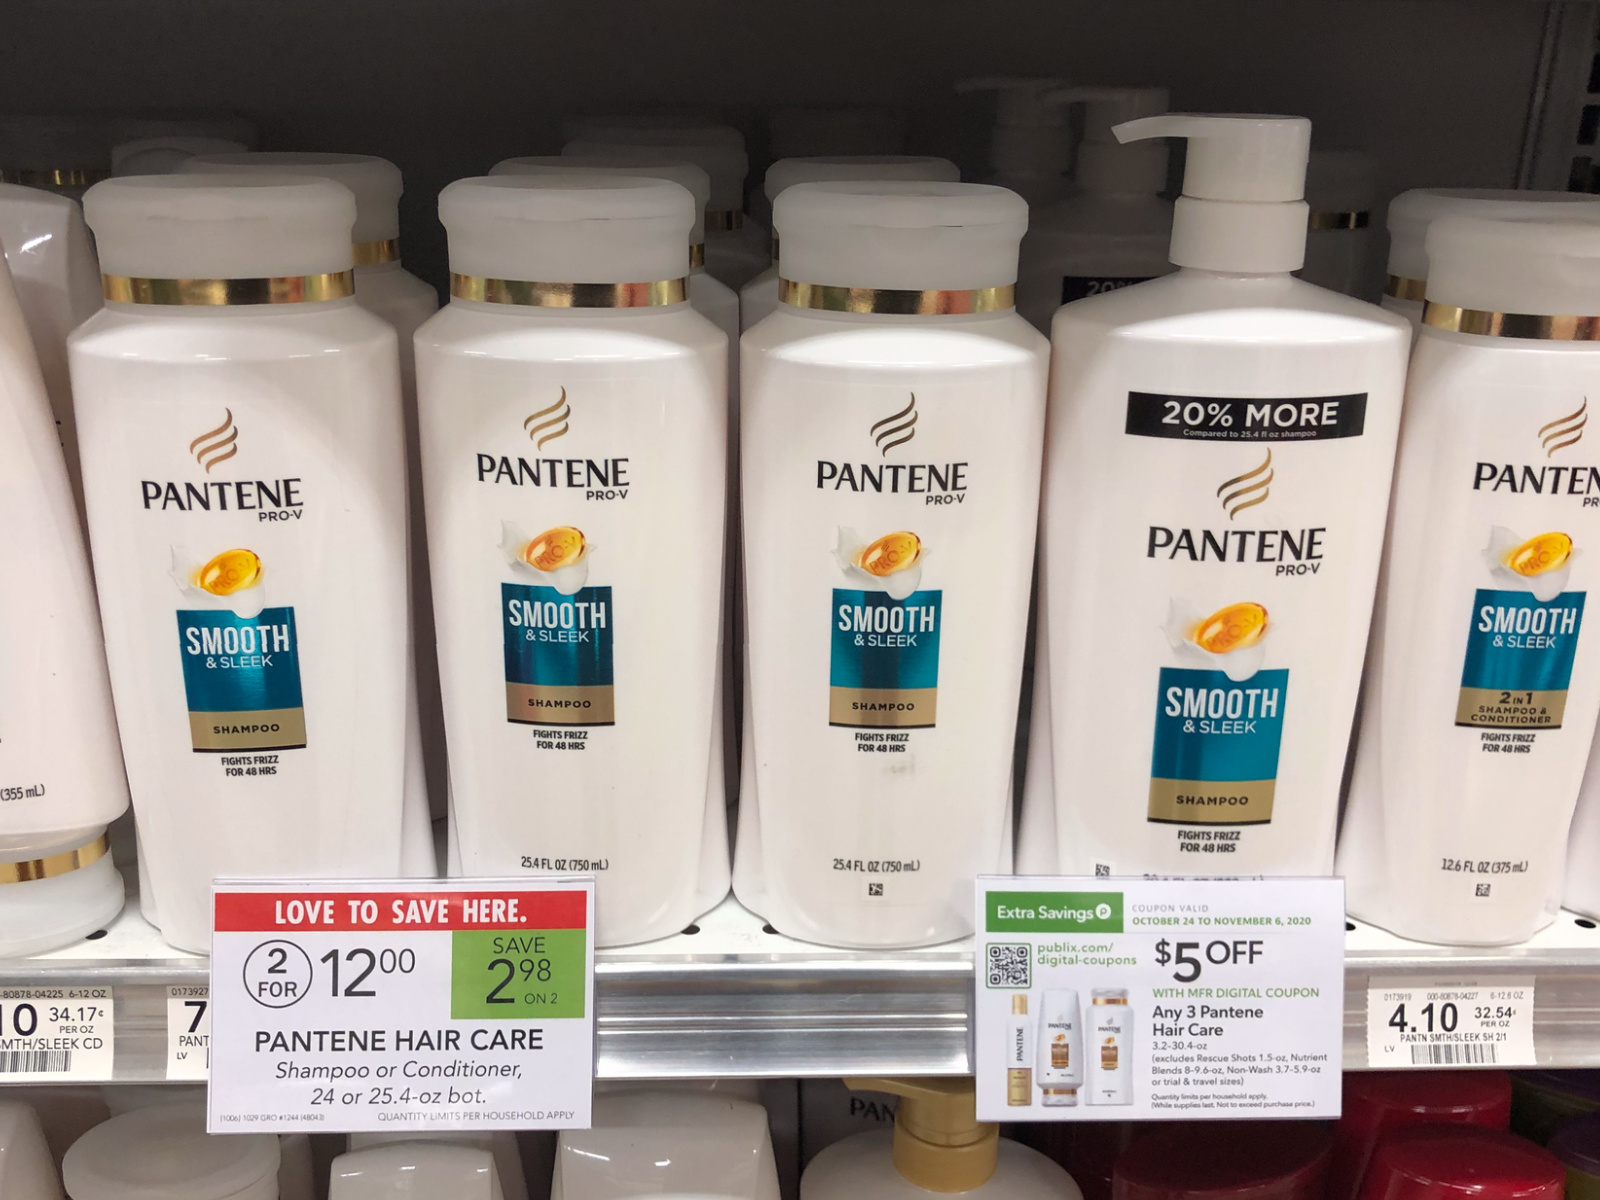 Buy $15 Worth of Participating P&G Products And Get A $5 Publix Gift Card Instantly! on I Heart Publix